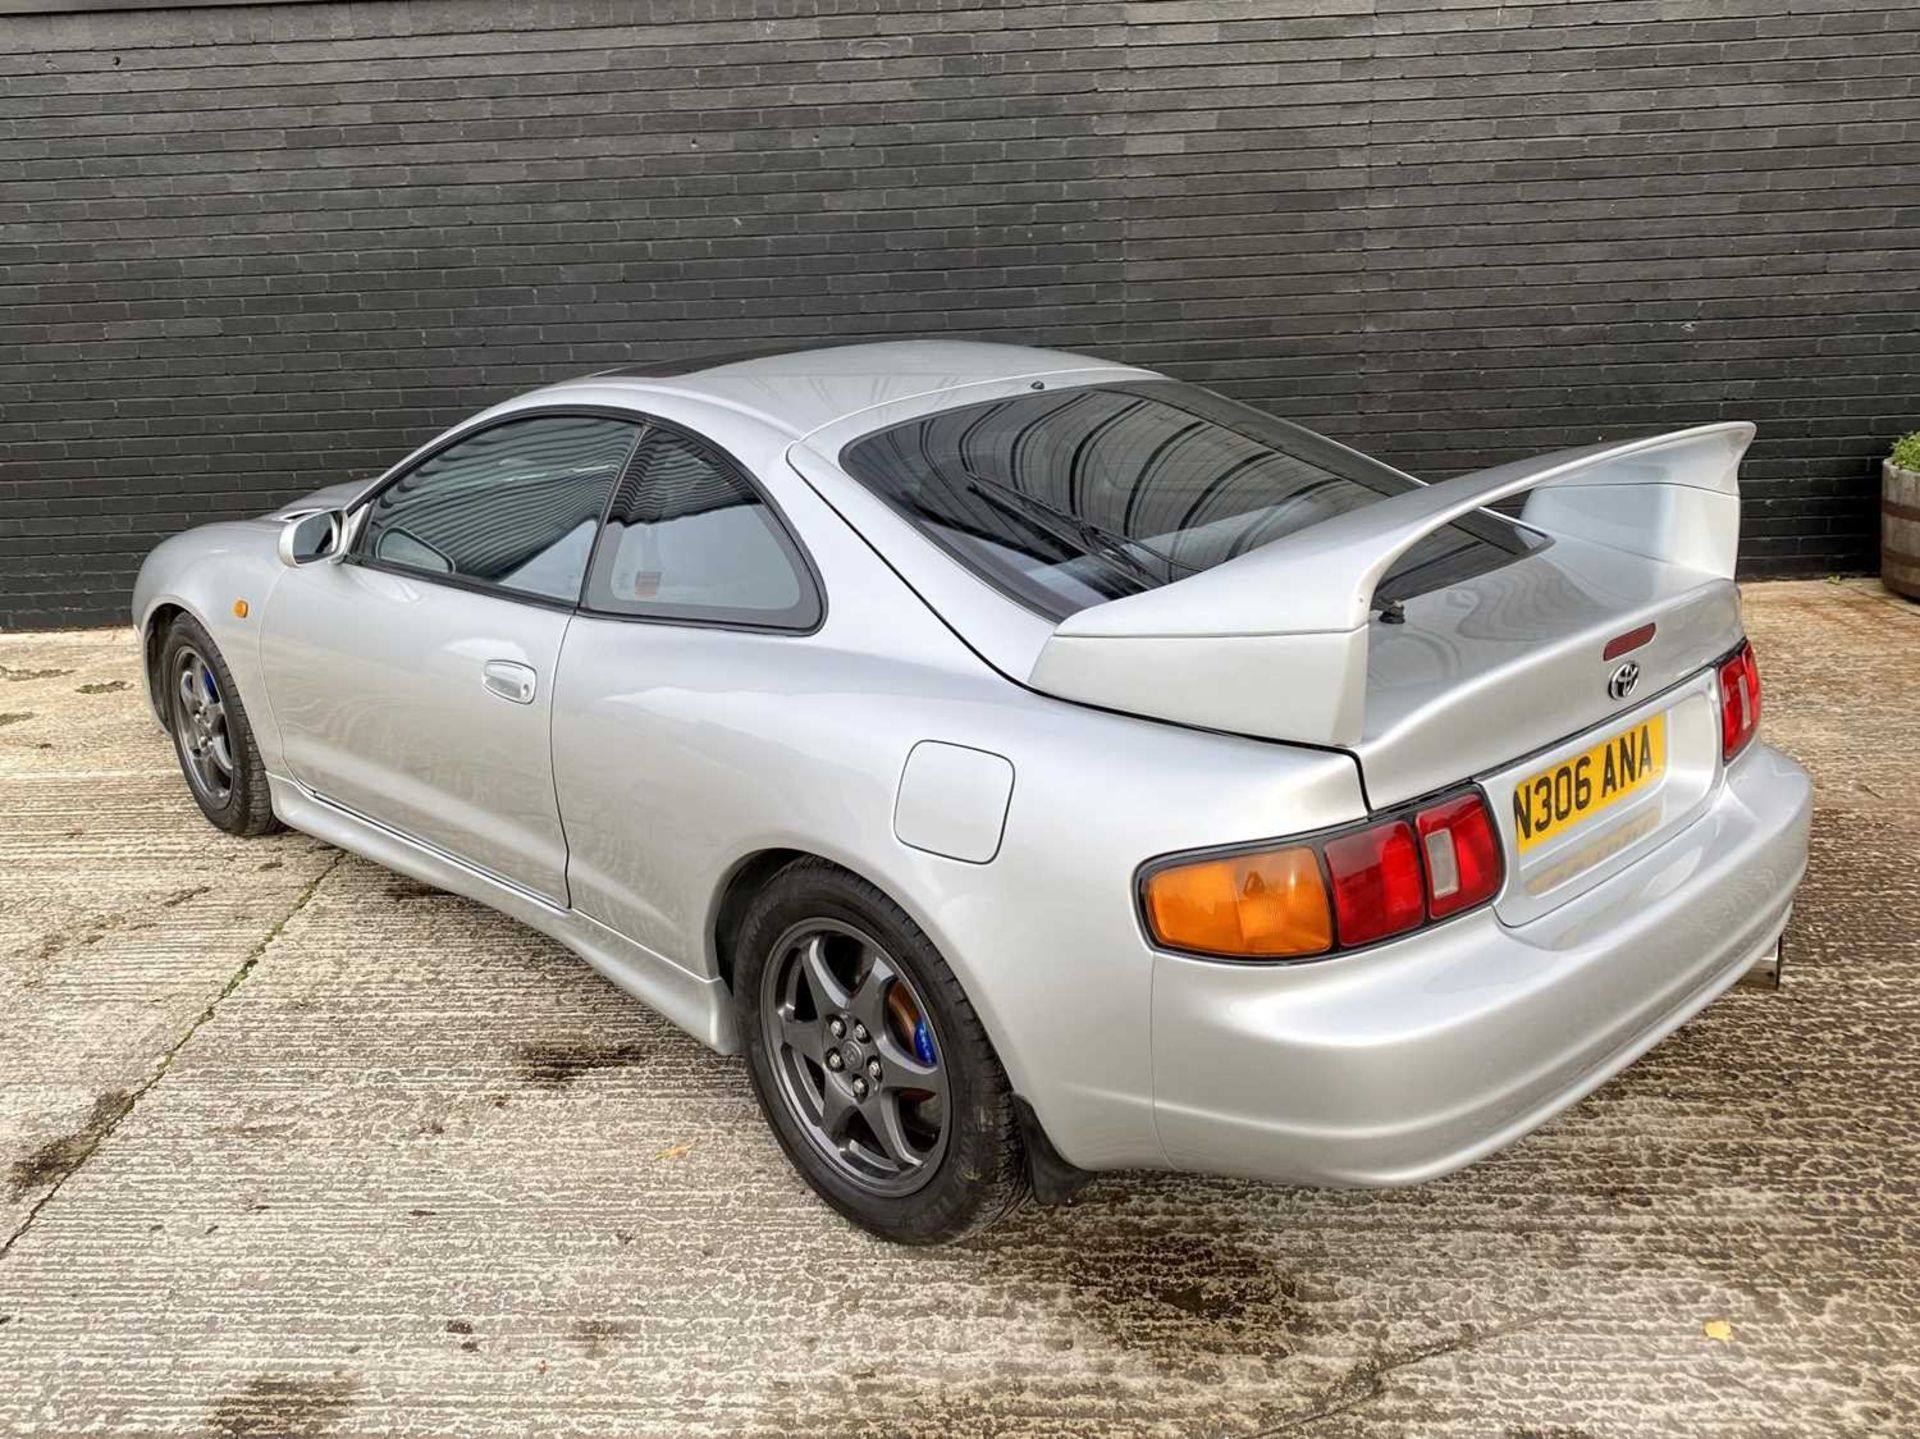 1996 Toyota Celica GT4 ST205 - Image 16 of 65